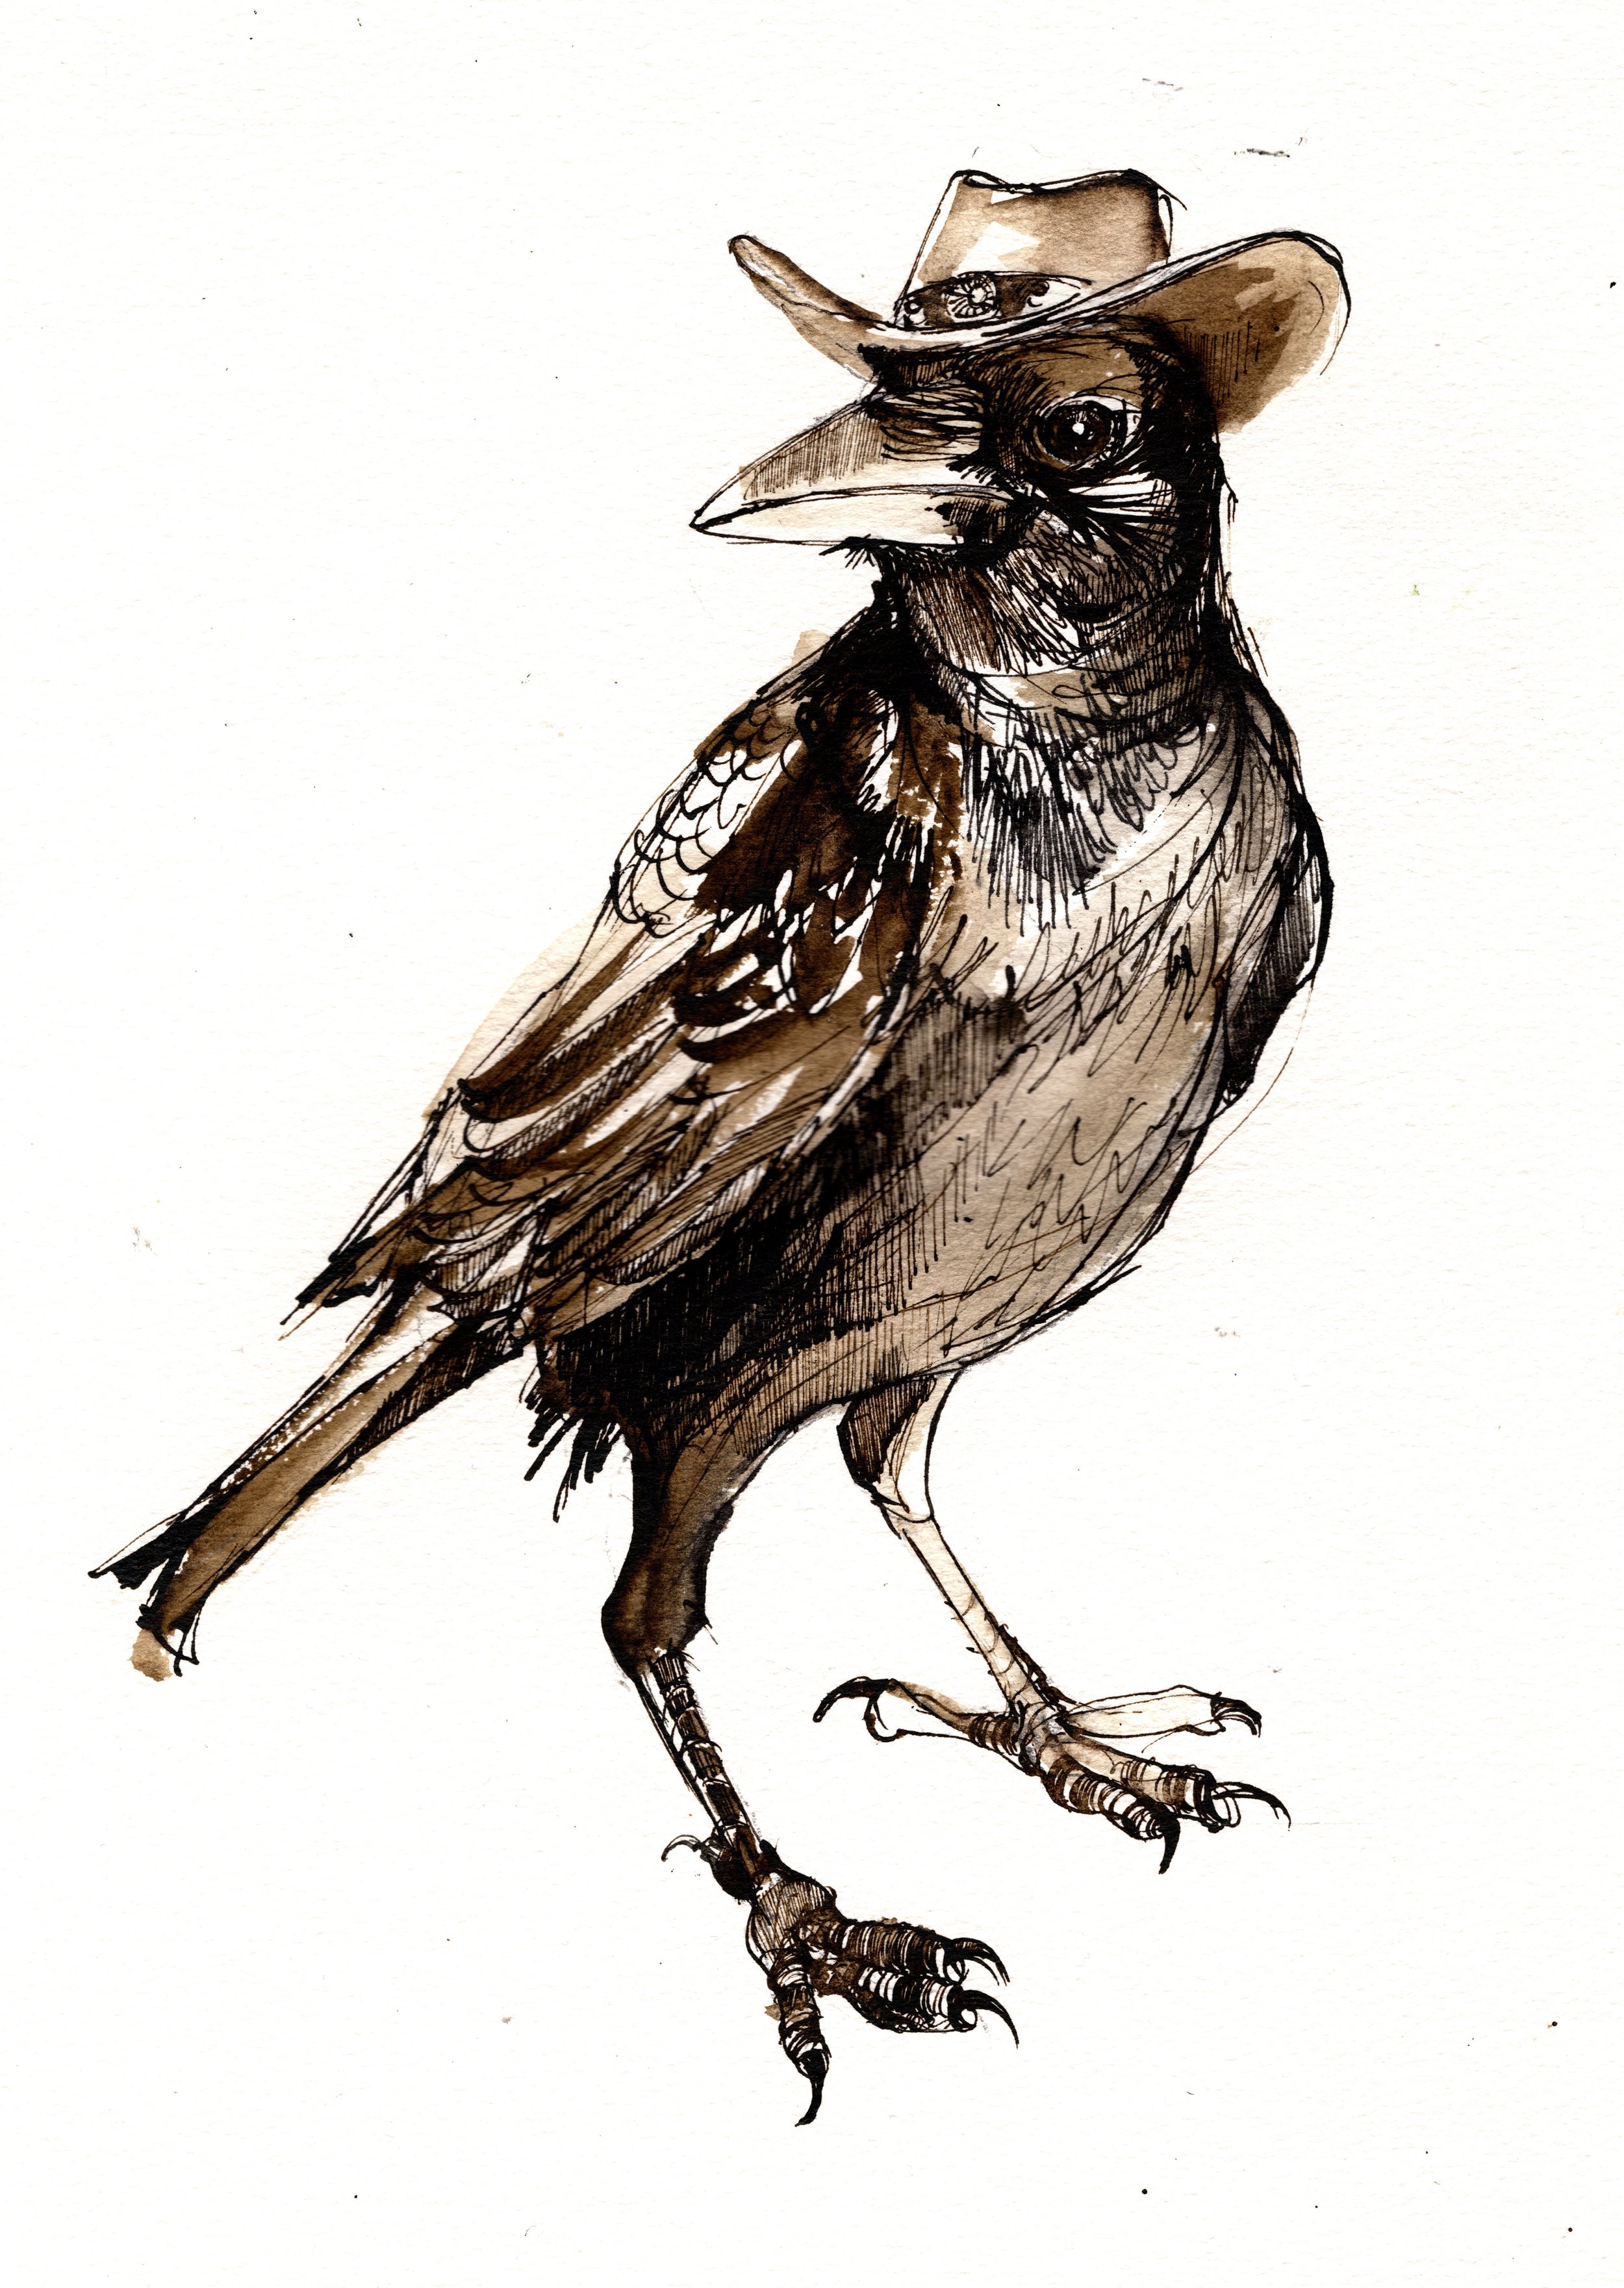 Crow in a cowboy Hat 'Yee Caw'